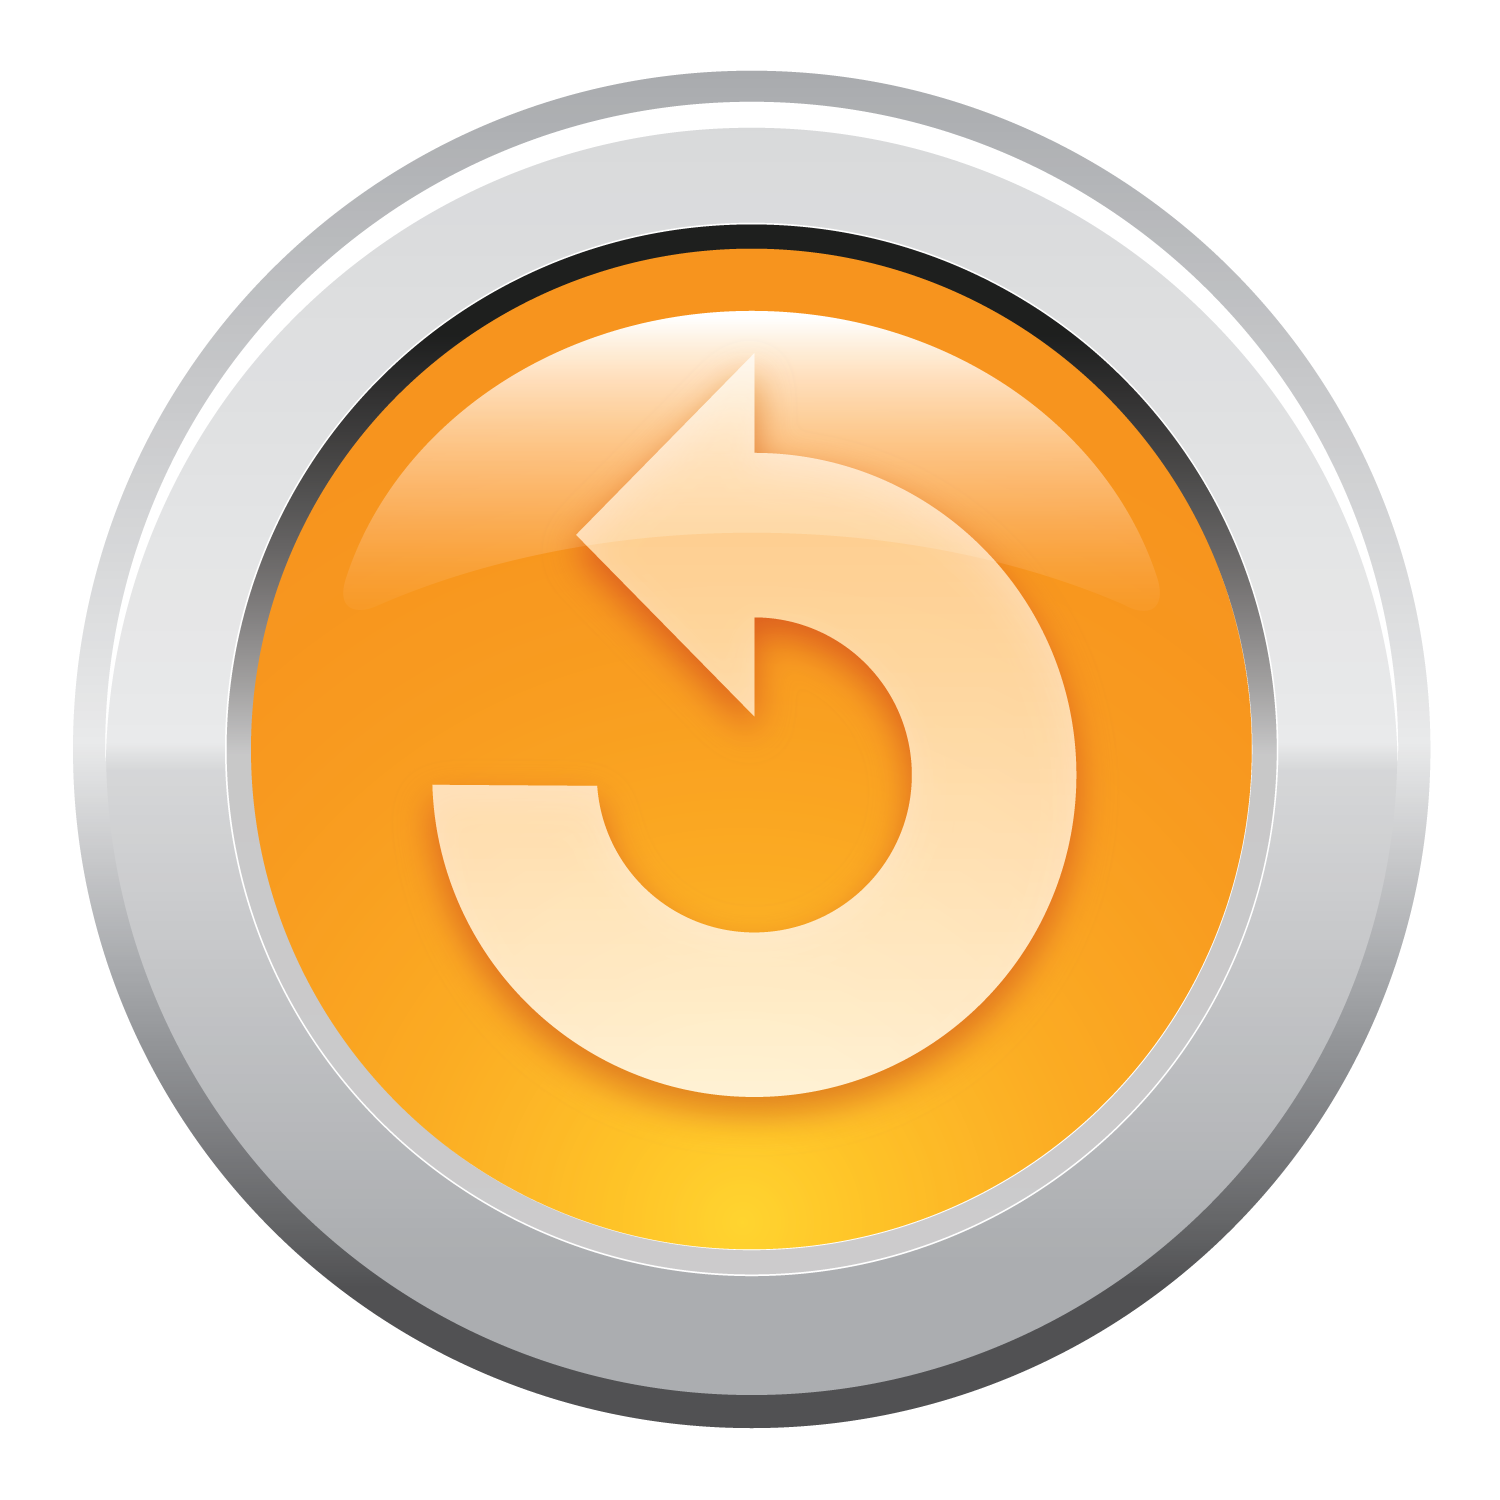 Backup, interface, recover, recovery, time icon | Icon search engine